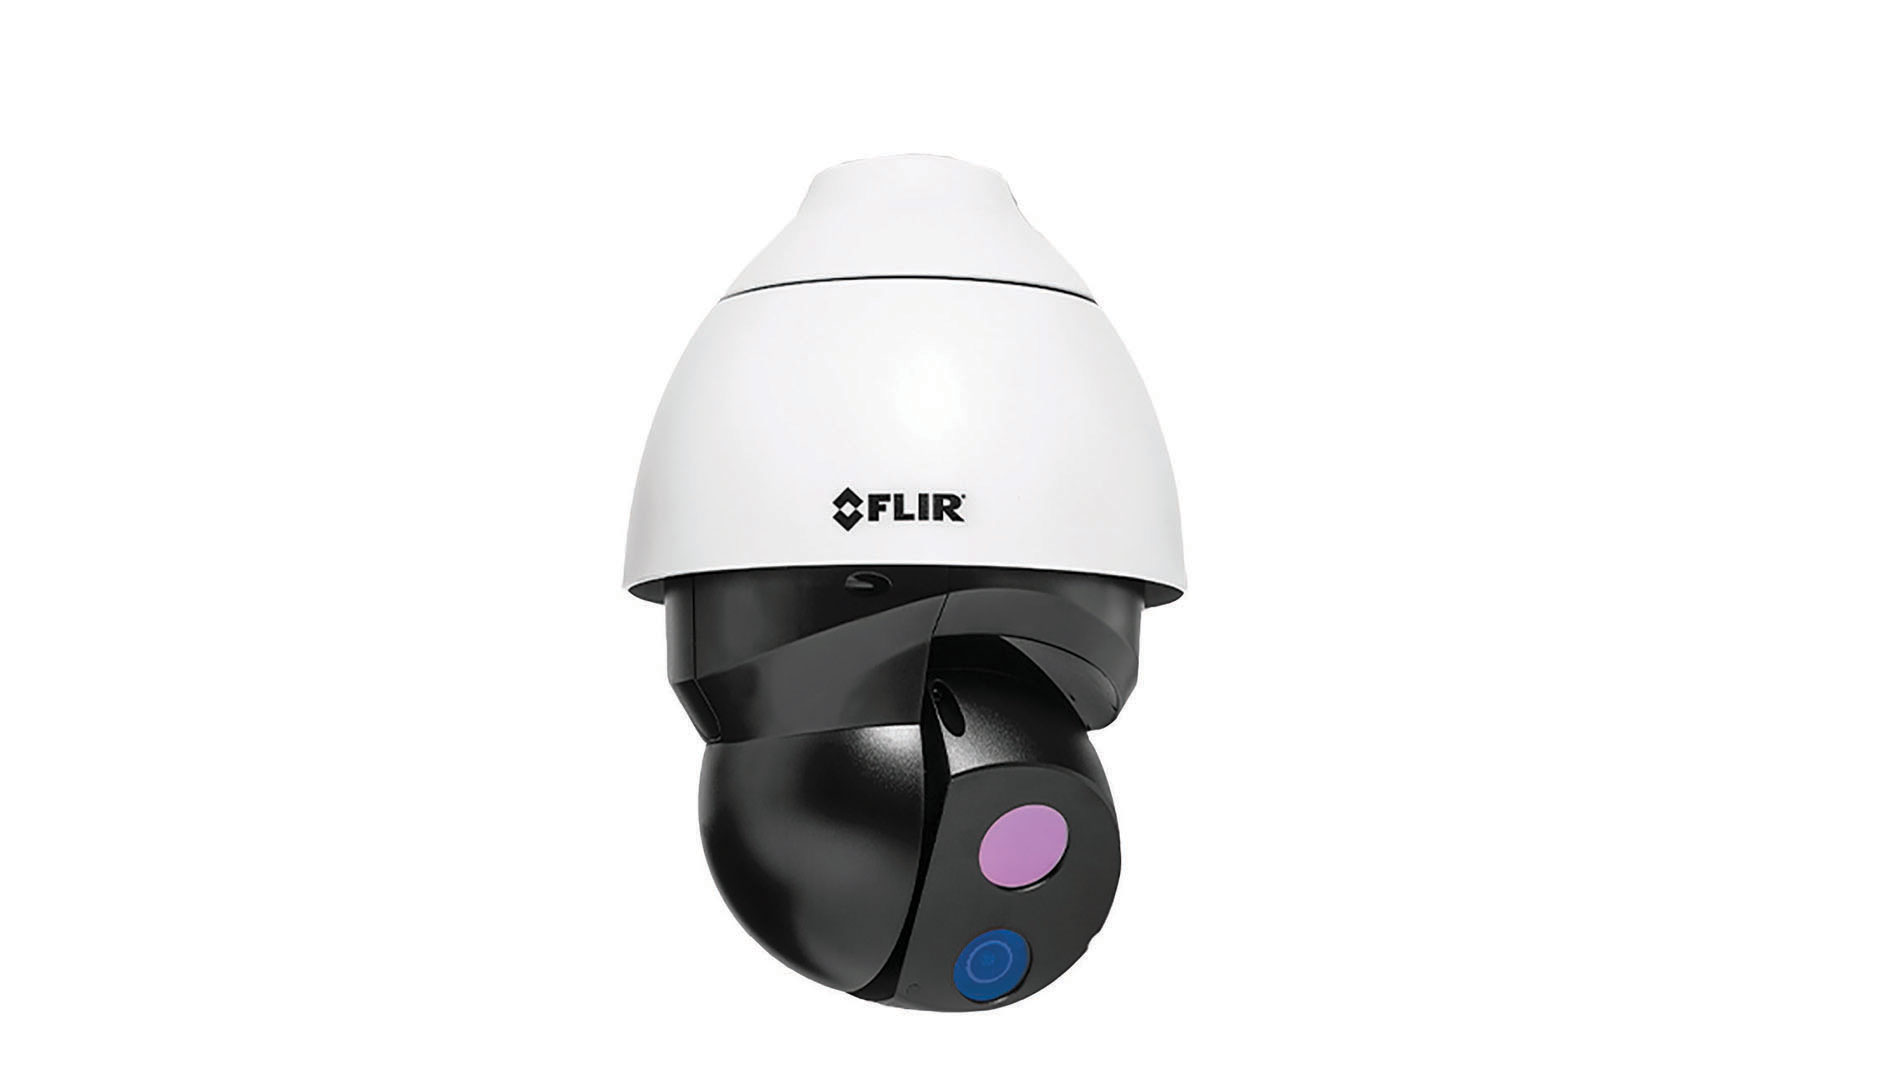 Black and white camera with blue and purple lenses. Image by Flir.